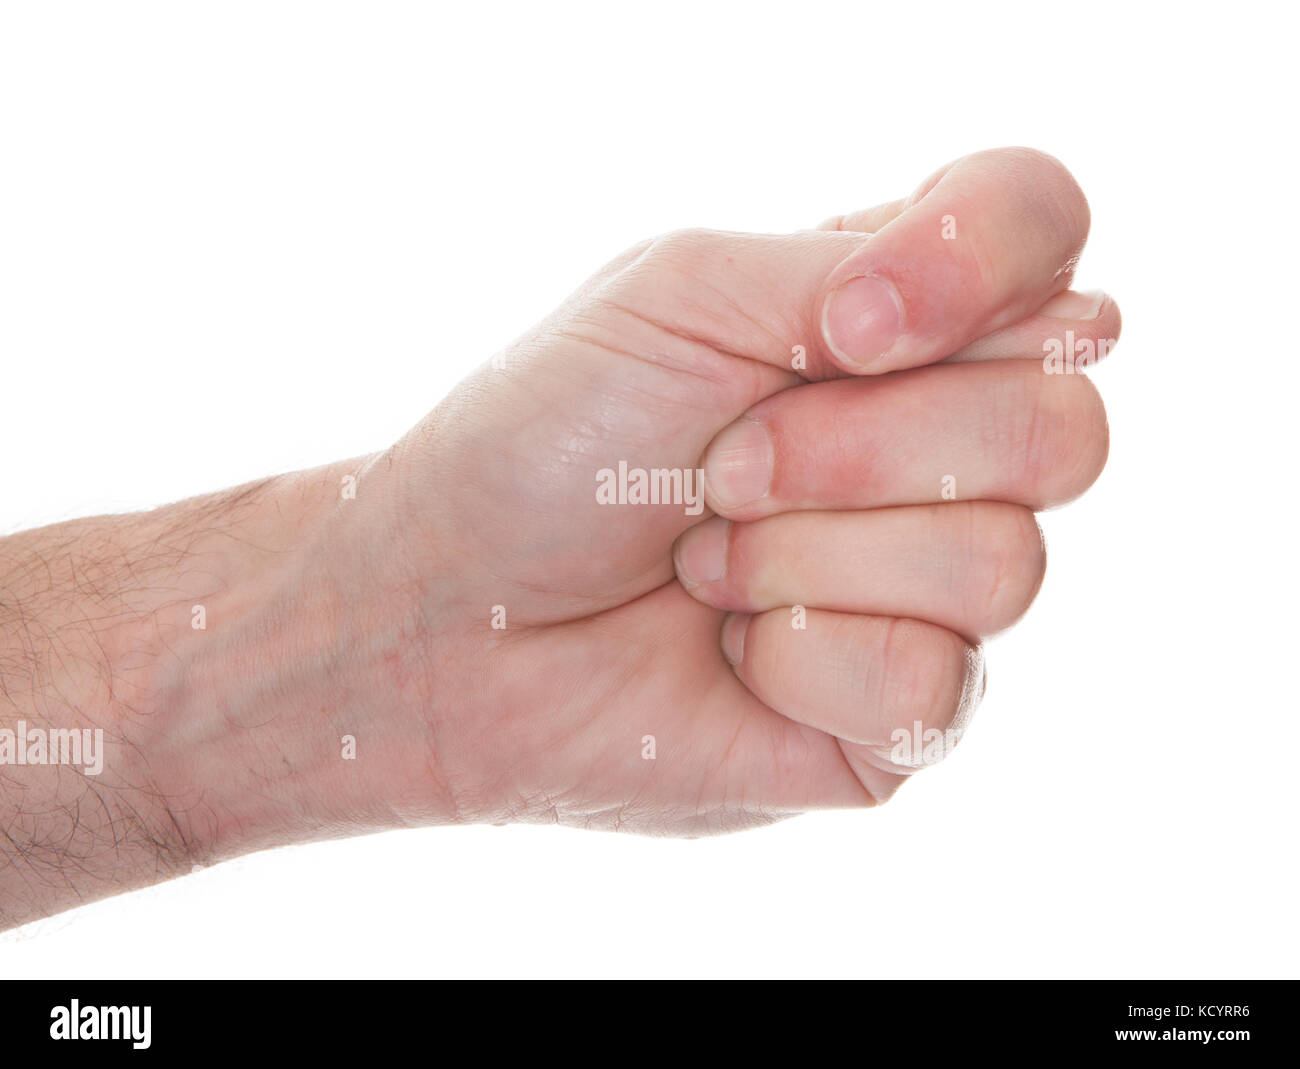 Close-up Man's Hand Clenching His Fist Over White Background Stock Photo